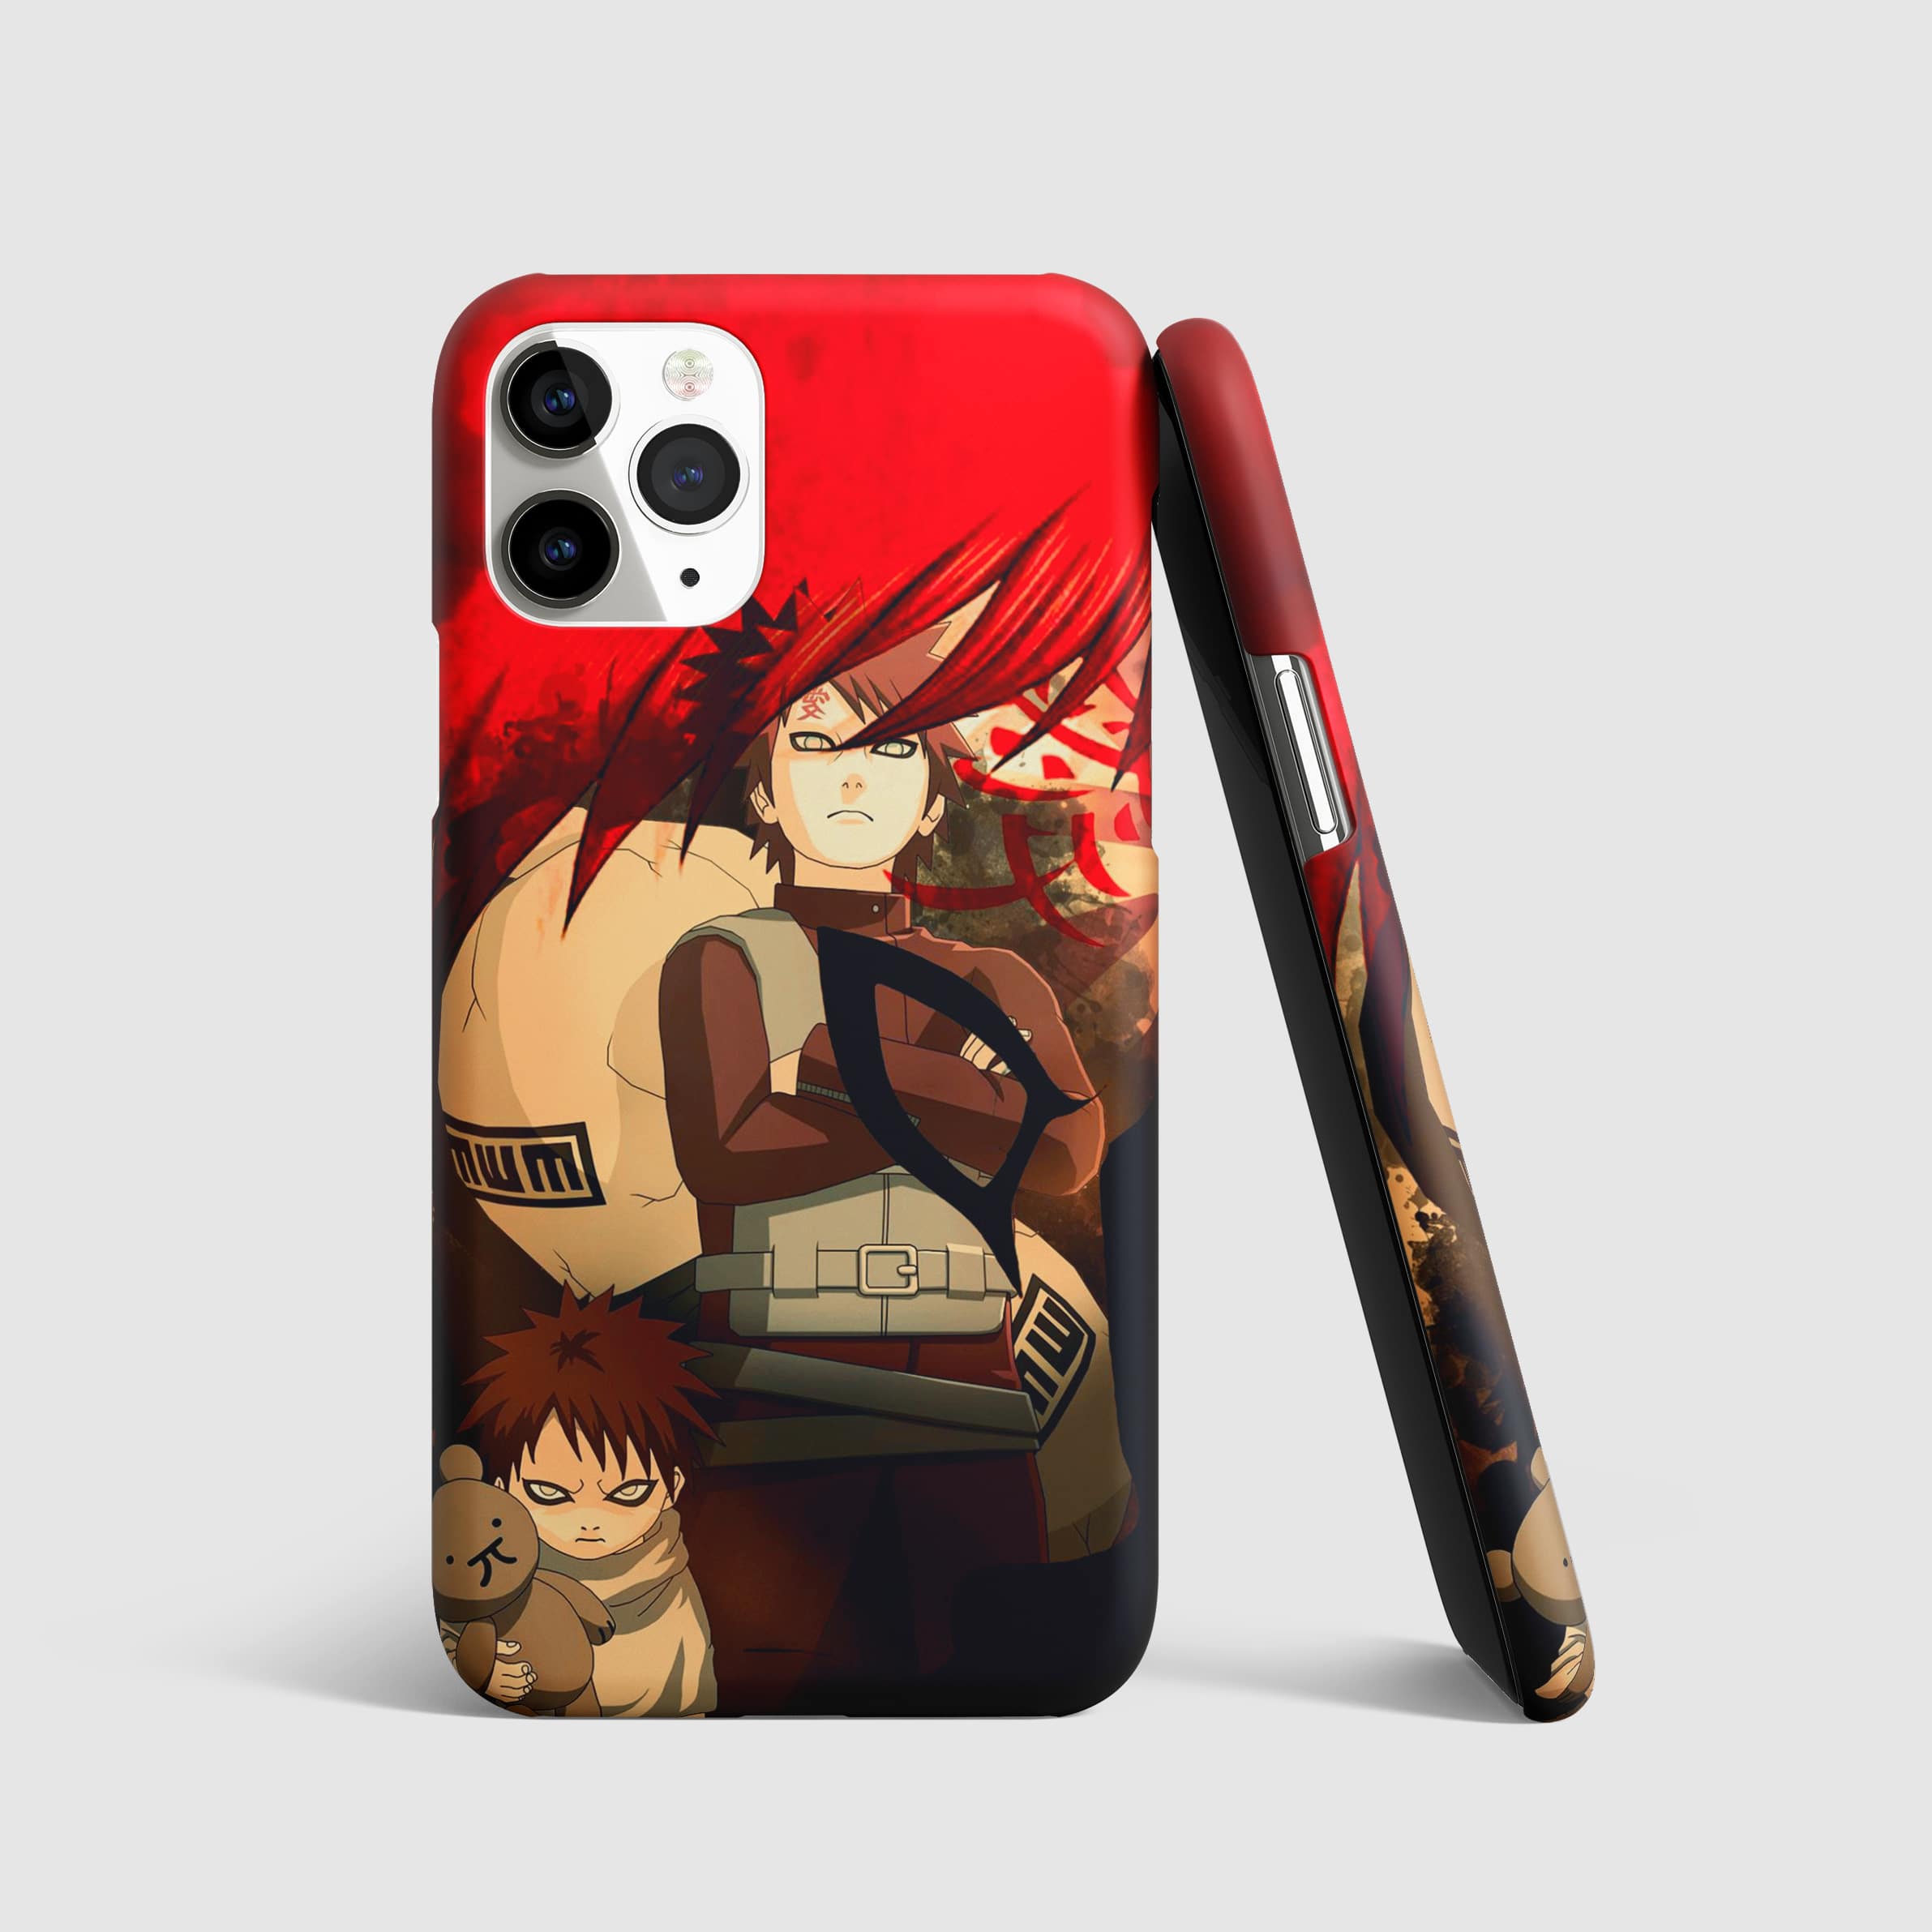 Gaara Phone Cover with 3D matte finish, featuring the iconic Gaara design.